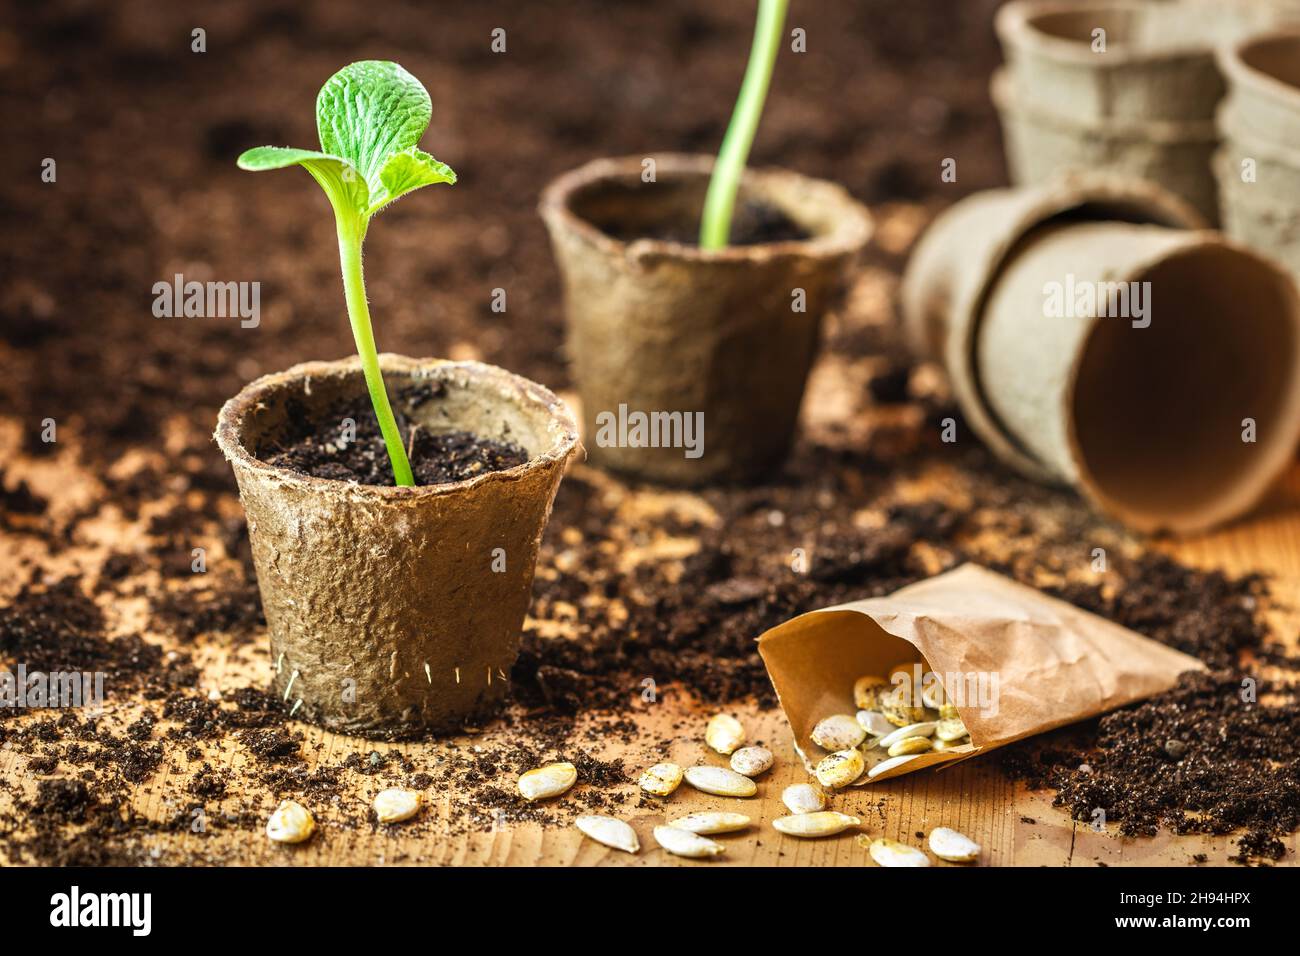 Planting and germinating pumpkin seeds in biodegradable peat pots. Small green seedling for vegetable garden Stock Photo